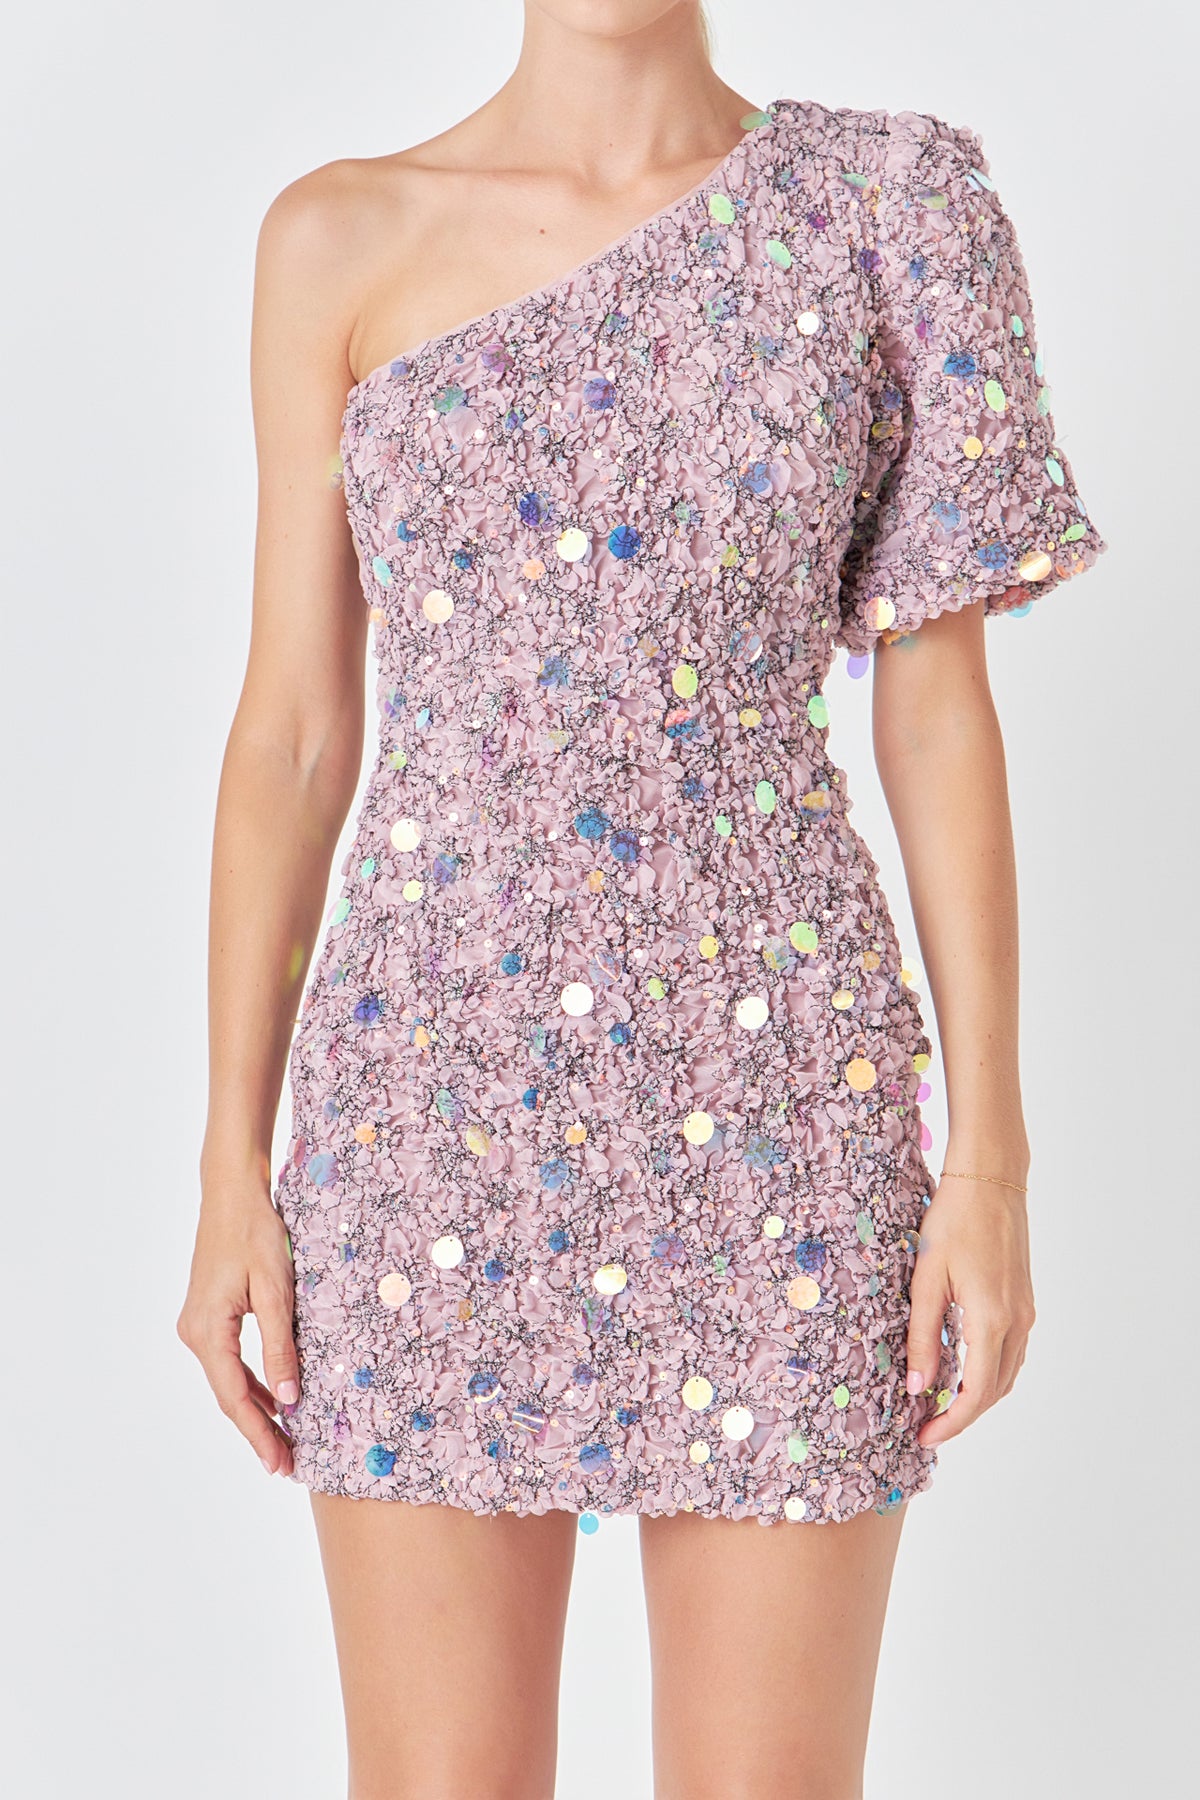 ENDLESS ROSE - Premium One-Shoulder Sequin Mini Dress - DRESSES available at Objectrare